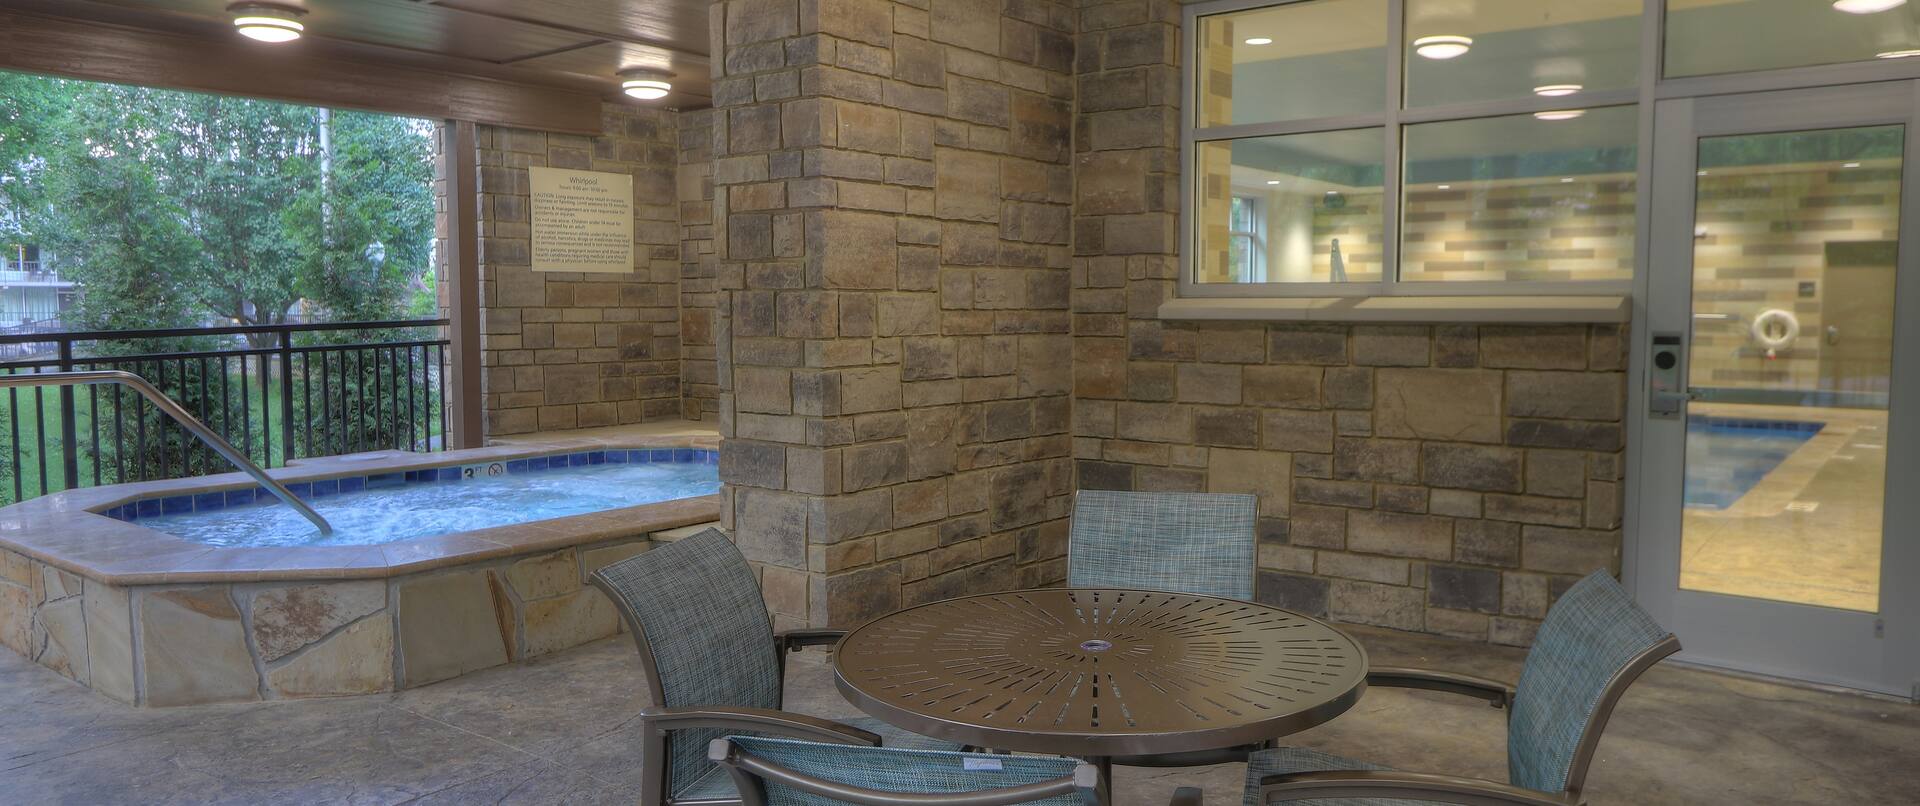 Outdoor Patio Seats and Table with Hot Tub